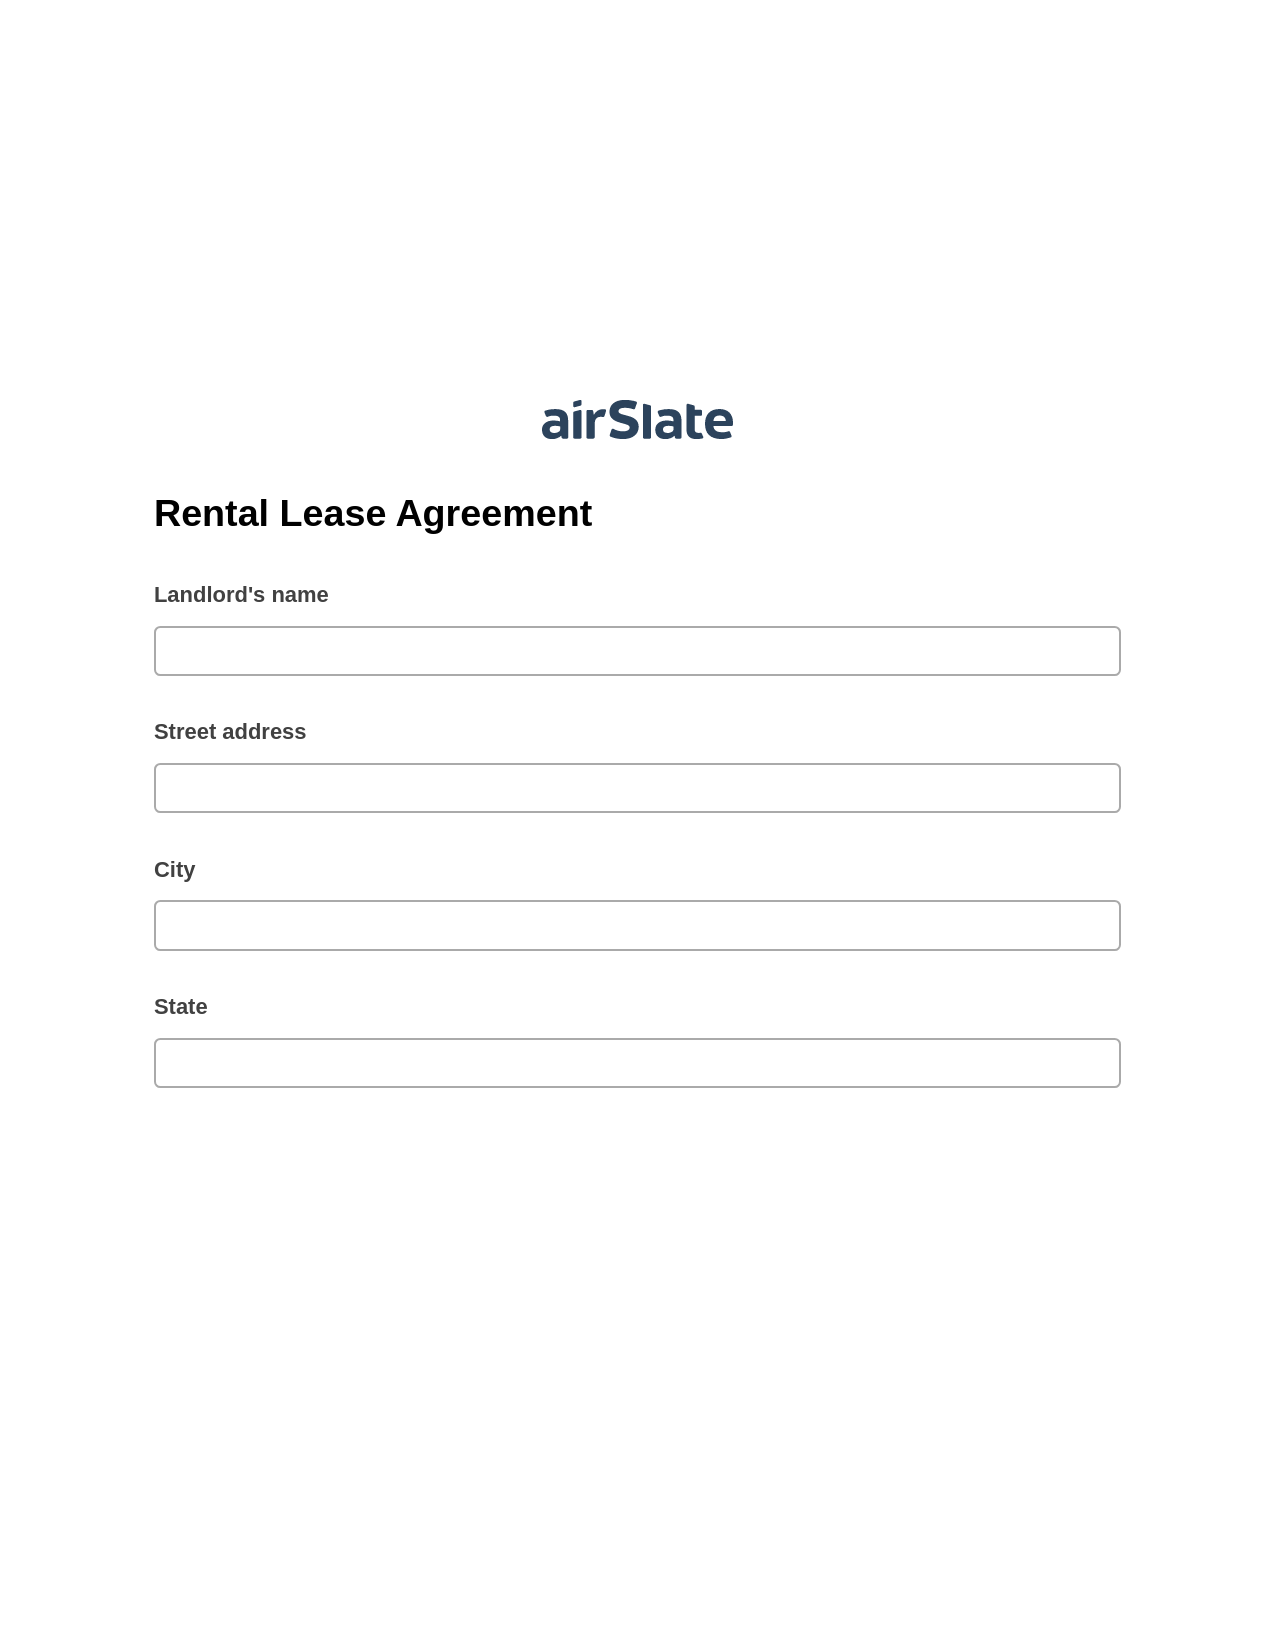 Rental Lease Agreement Pre-fill from CSV File Dropdown Options Bot, Send a Slate with Roles Bot, Export to MySQL Bot